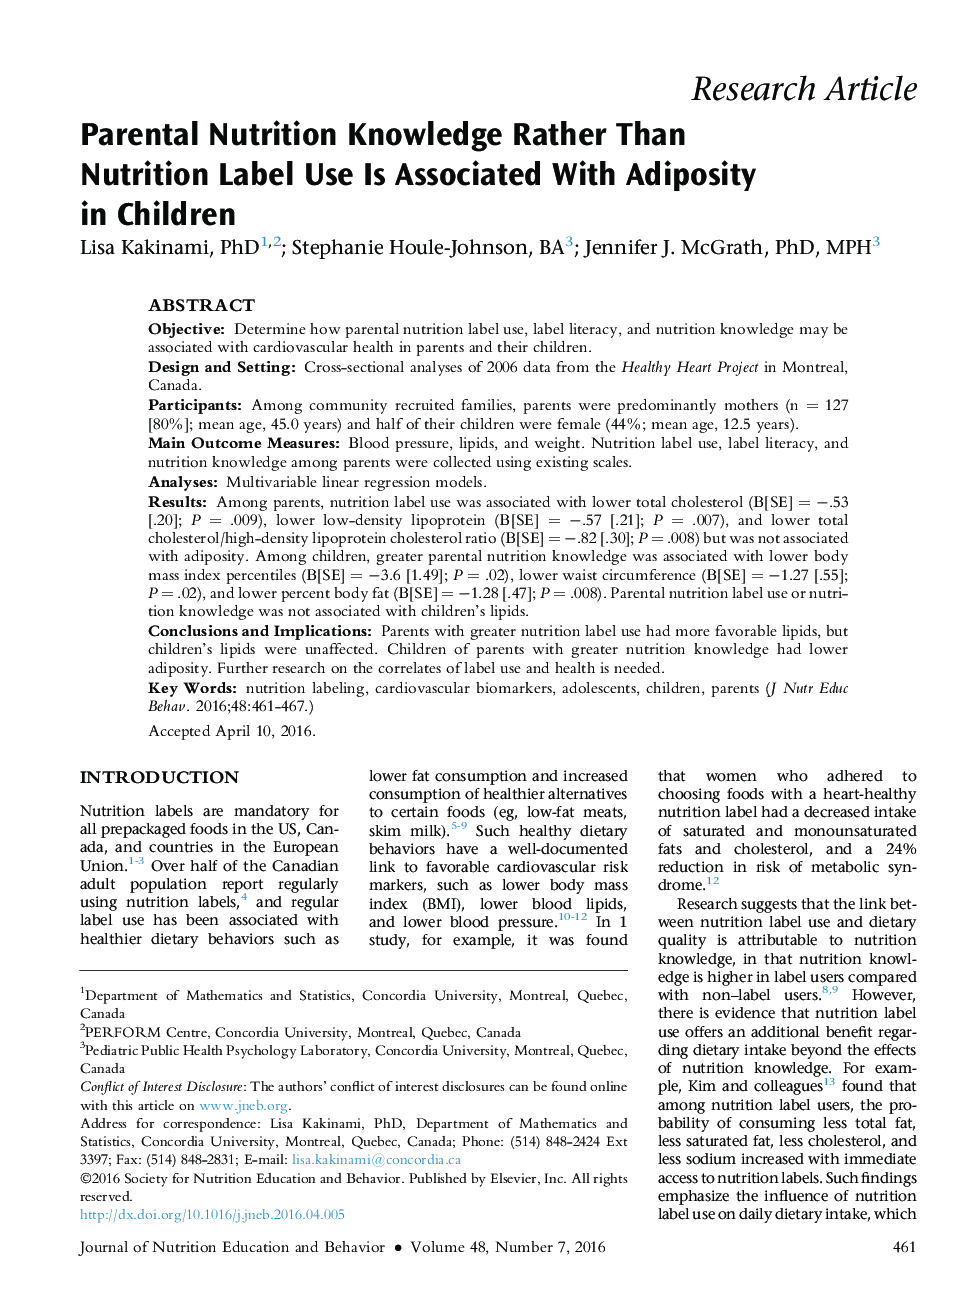 Parental Nutrition Knowledge Rather Than Nutrition Label Use Is Associated With Adiposity in Children